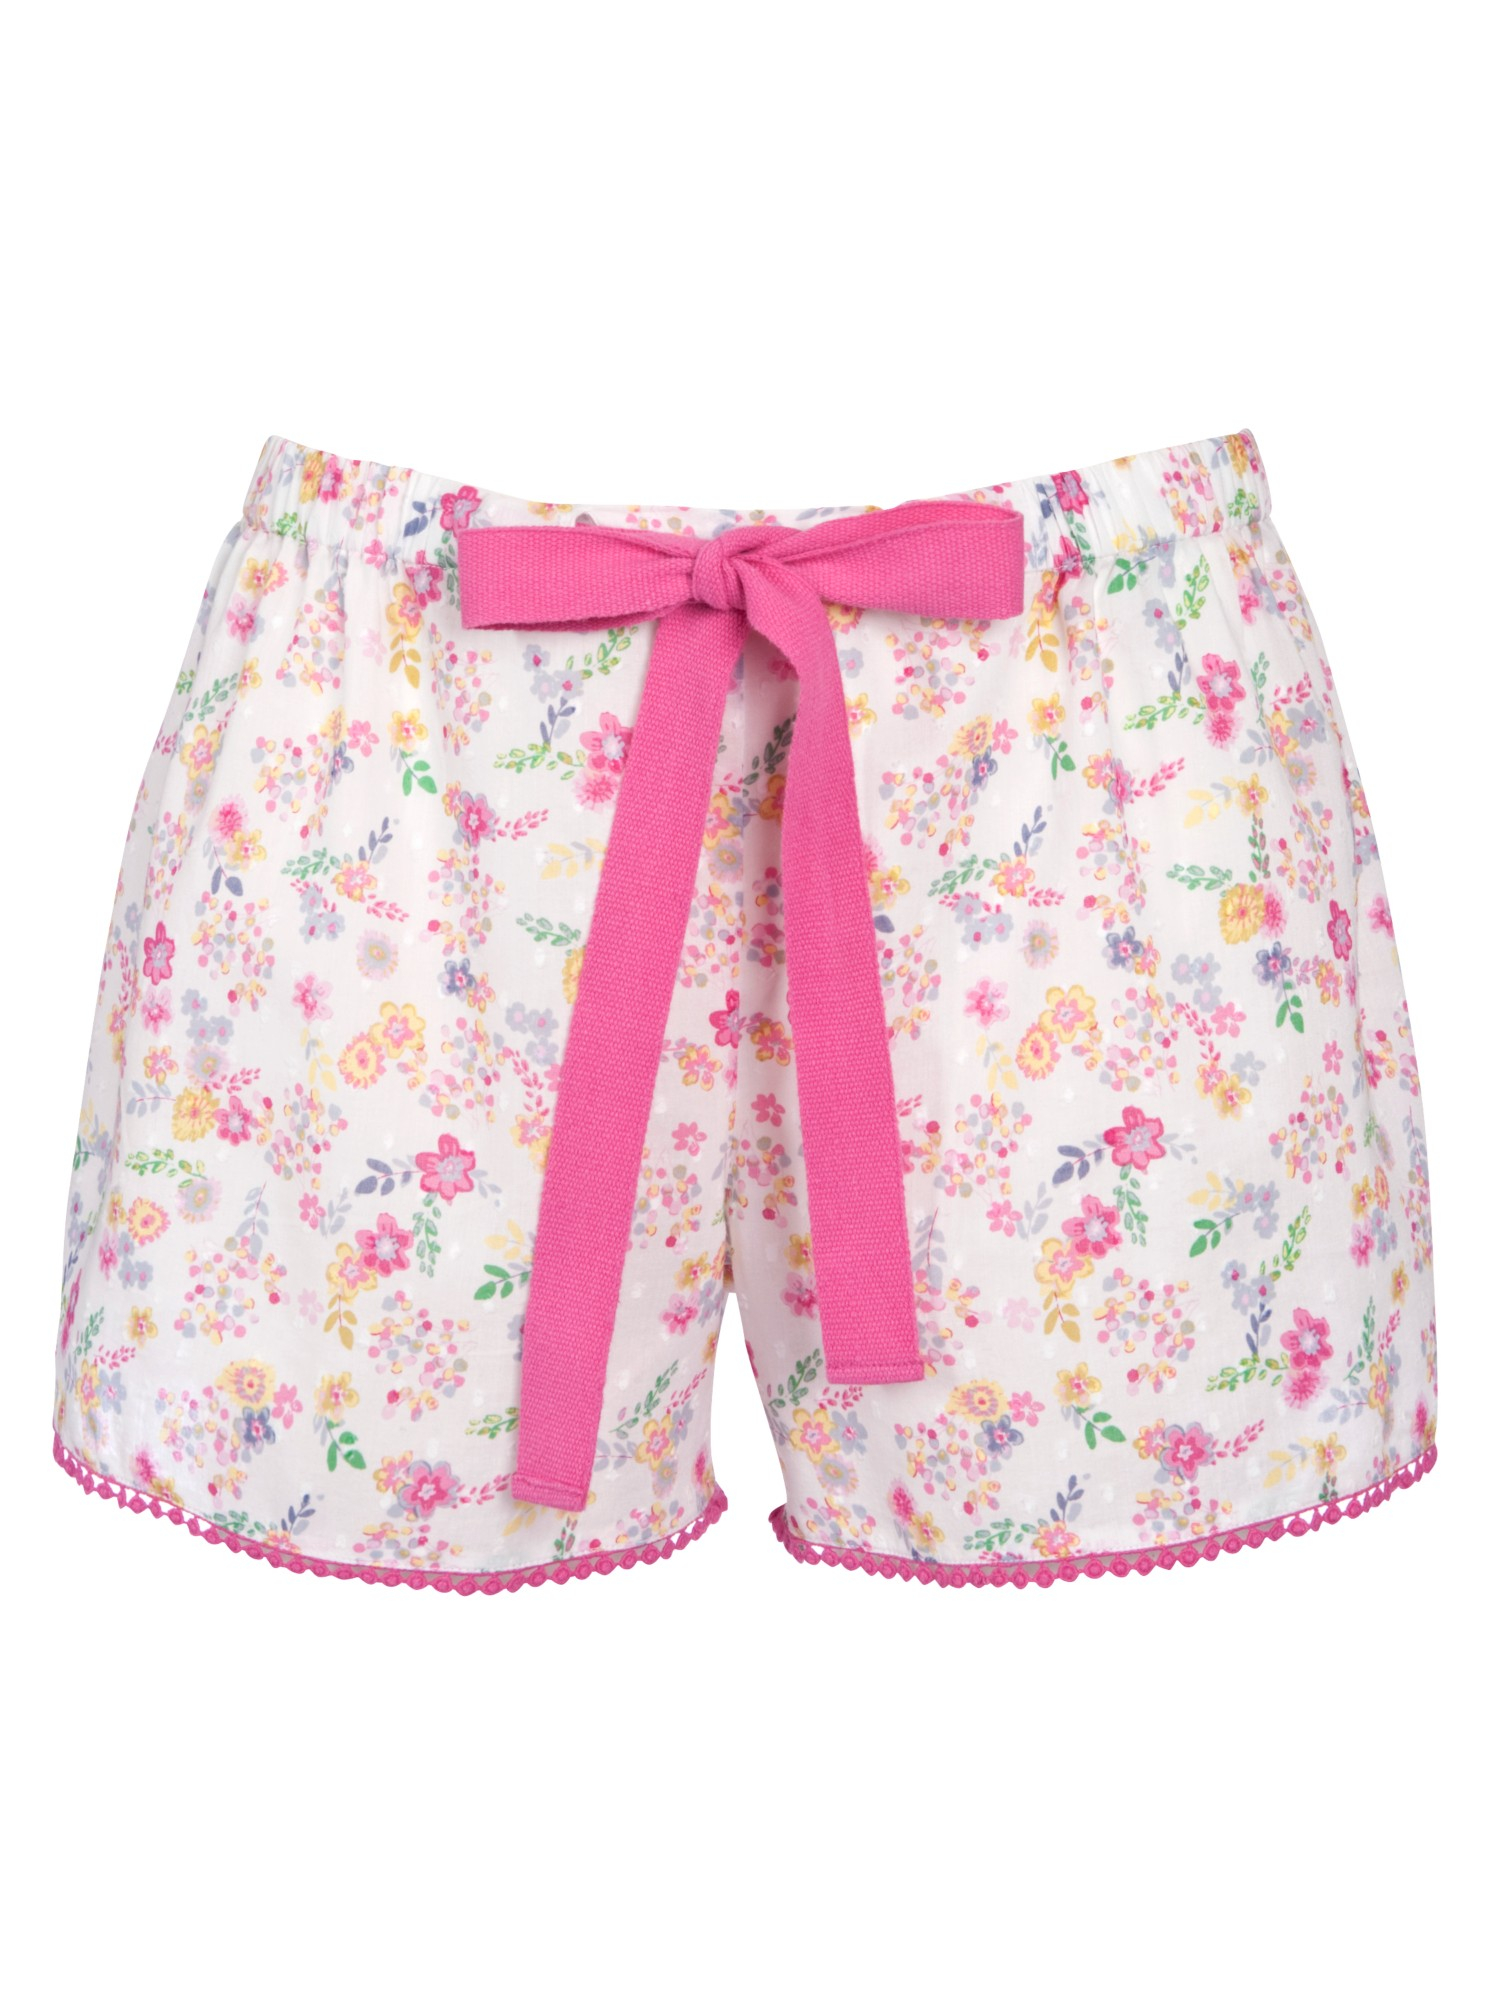 John Lewis Ditsy Floral Pyjama Shorts in Pink - Lyst